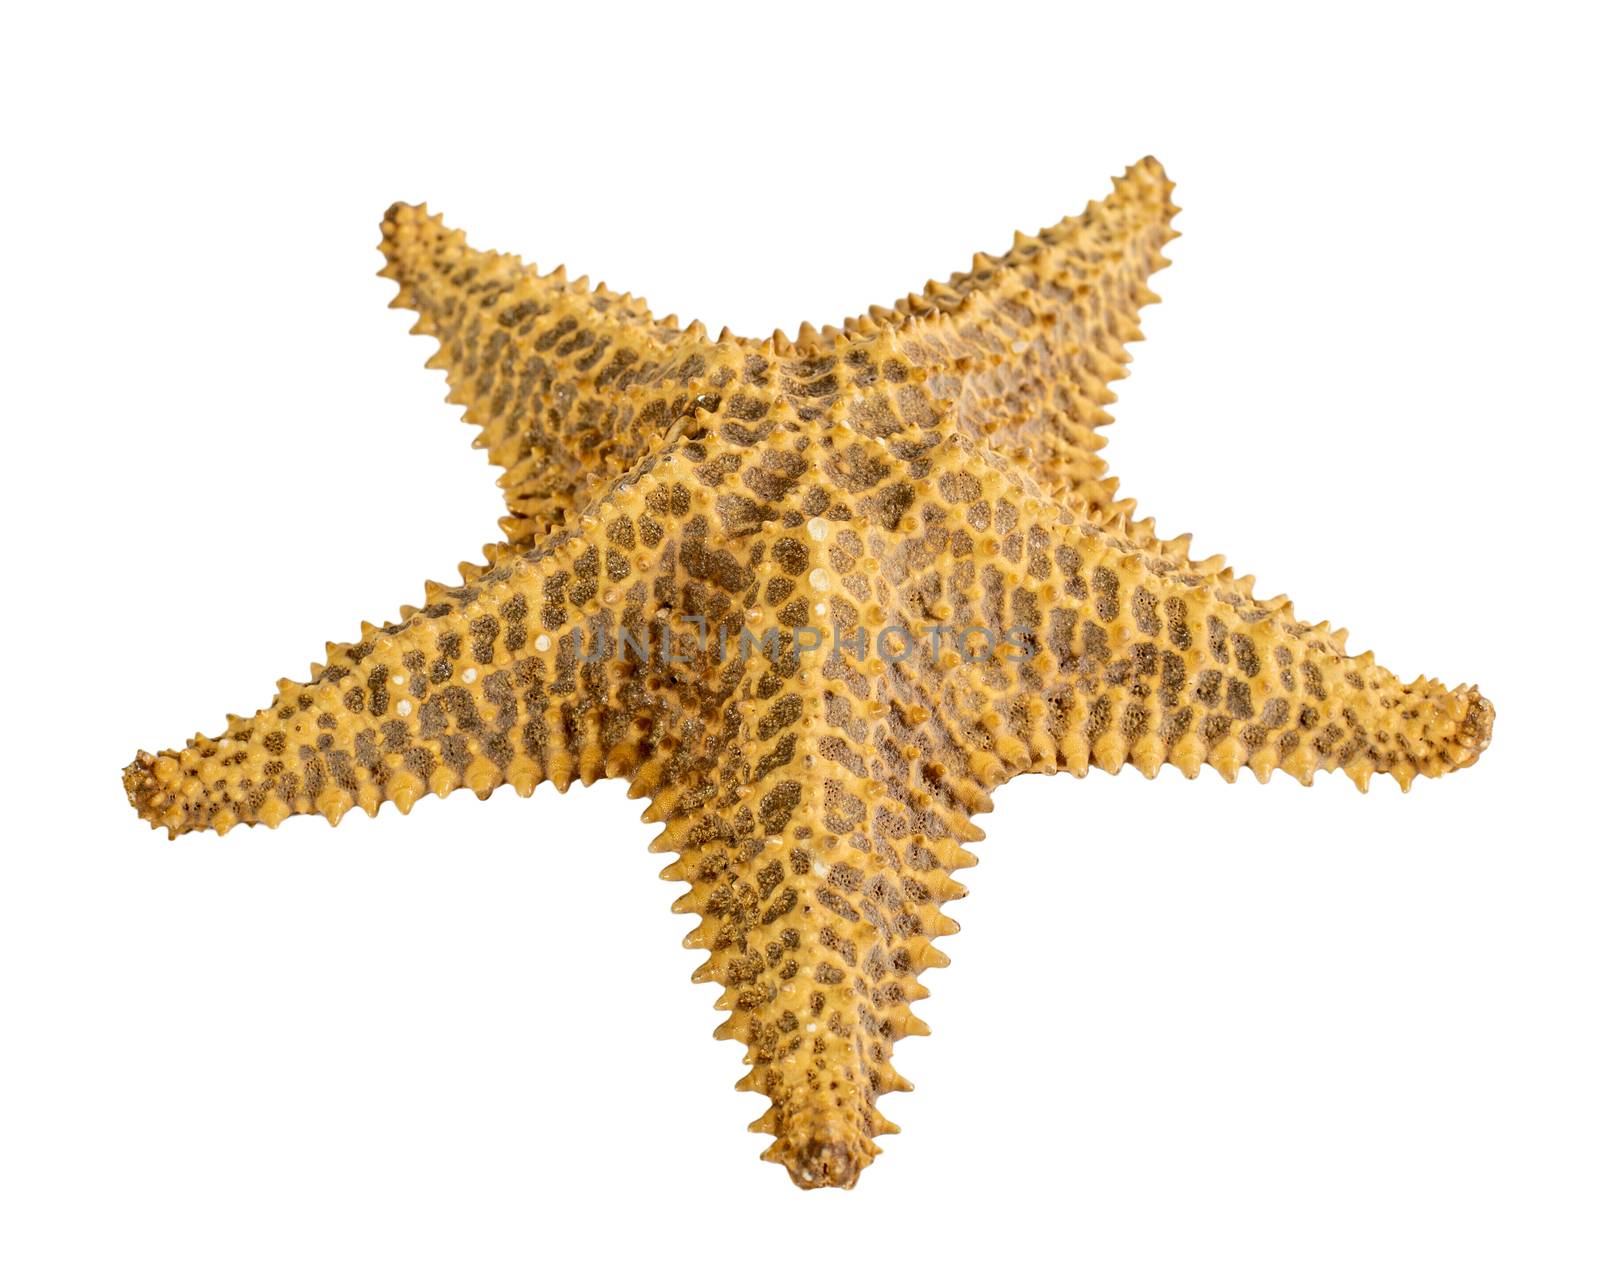 starfish brown isolated on a white background. Close-up. Side view